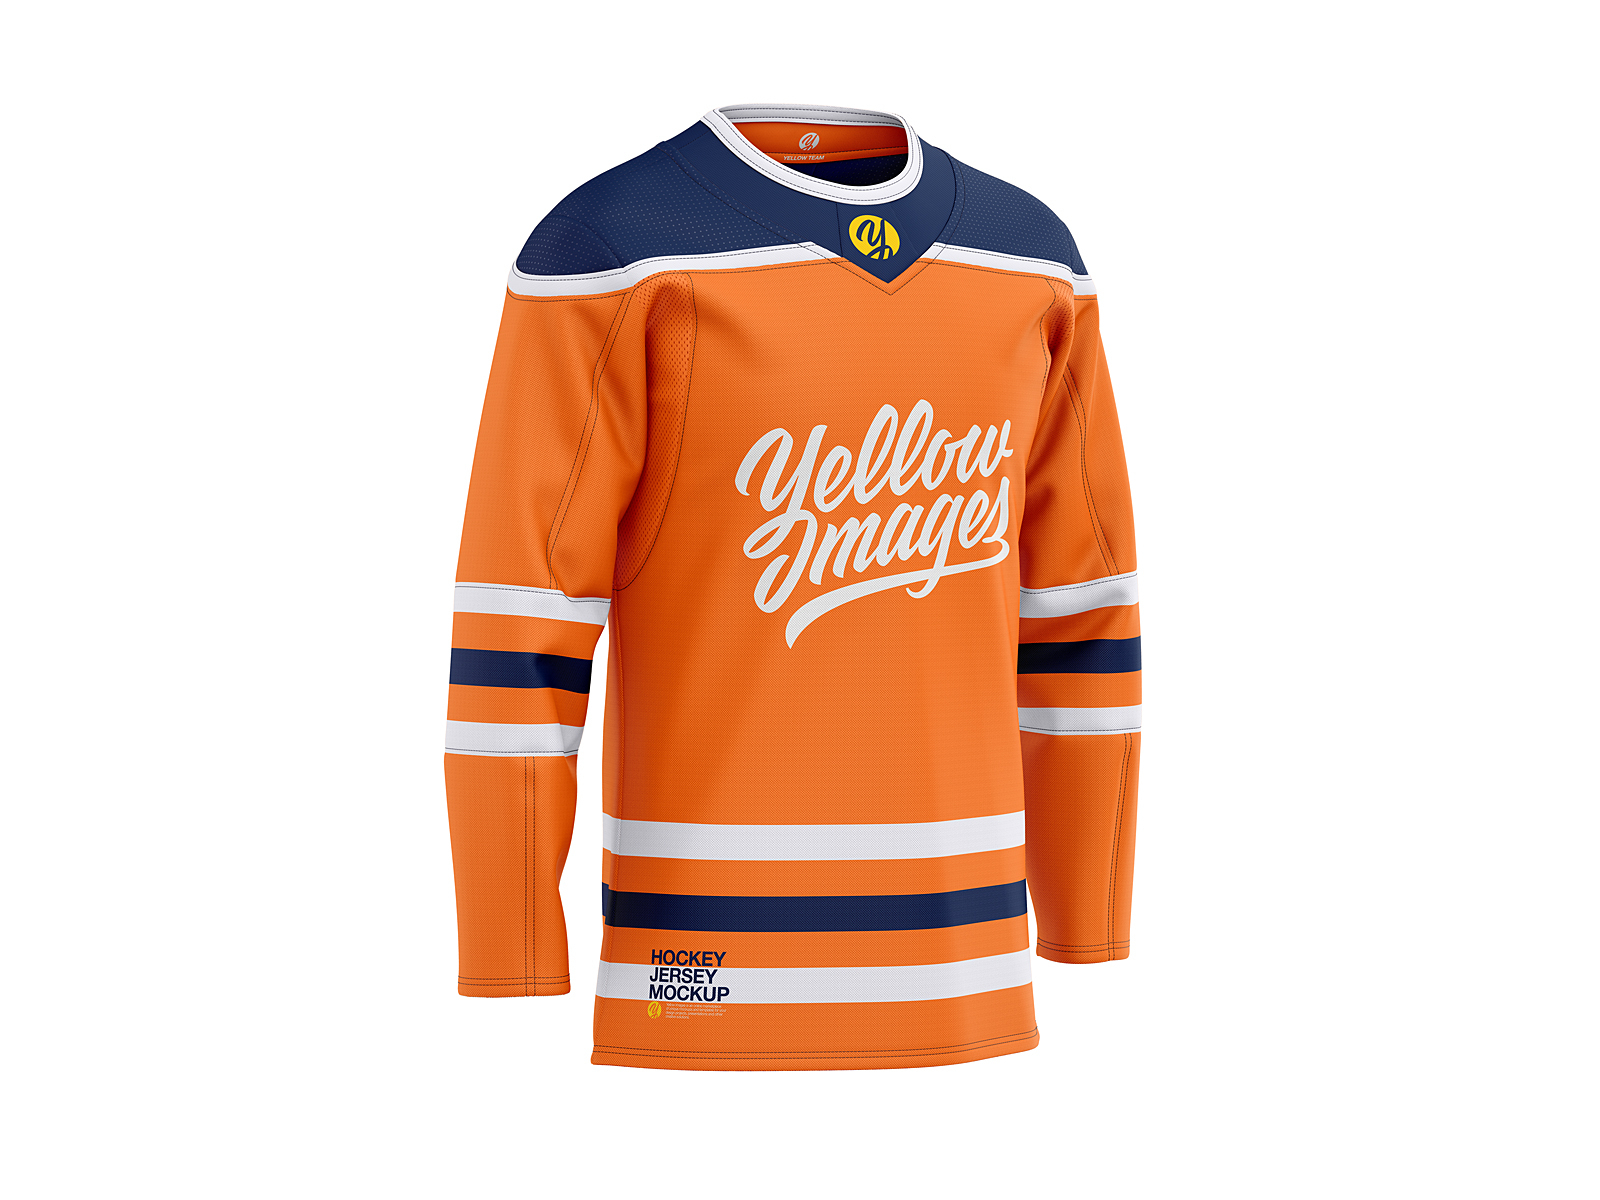 Download Hockey Jersey Mockup By Cg Tailor On Dribbble PSD Mockup Templates